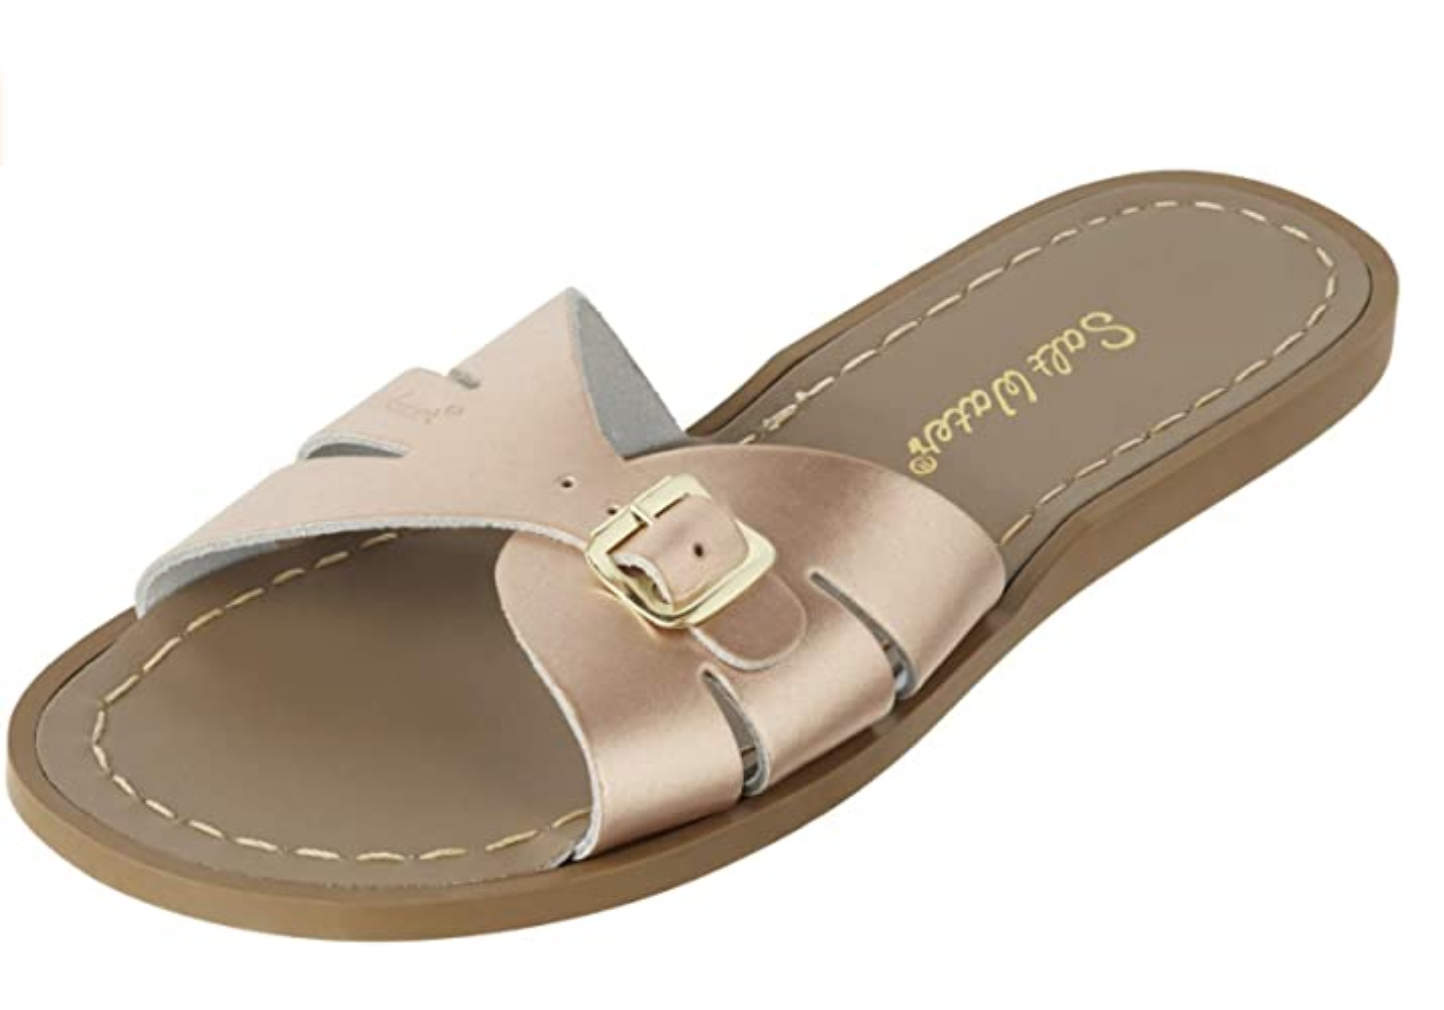 Salt Water Sandals - Women#039;s -Classic Inexpensive Rose Gold low-pricing RU Slides-